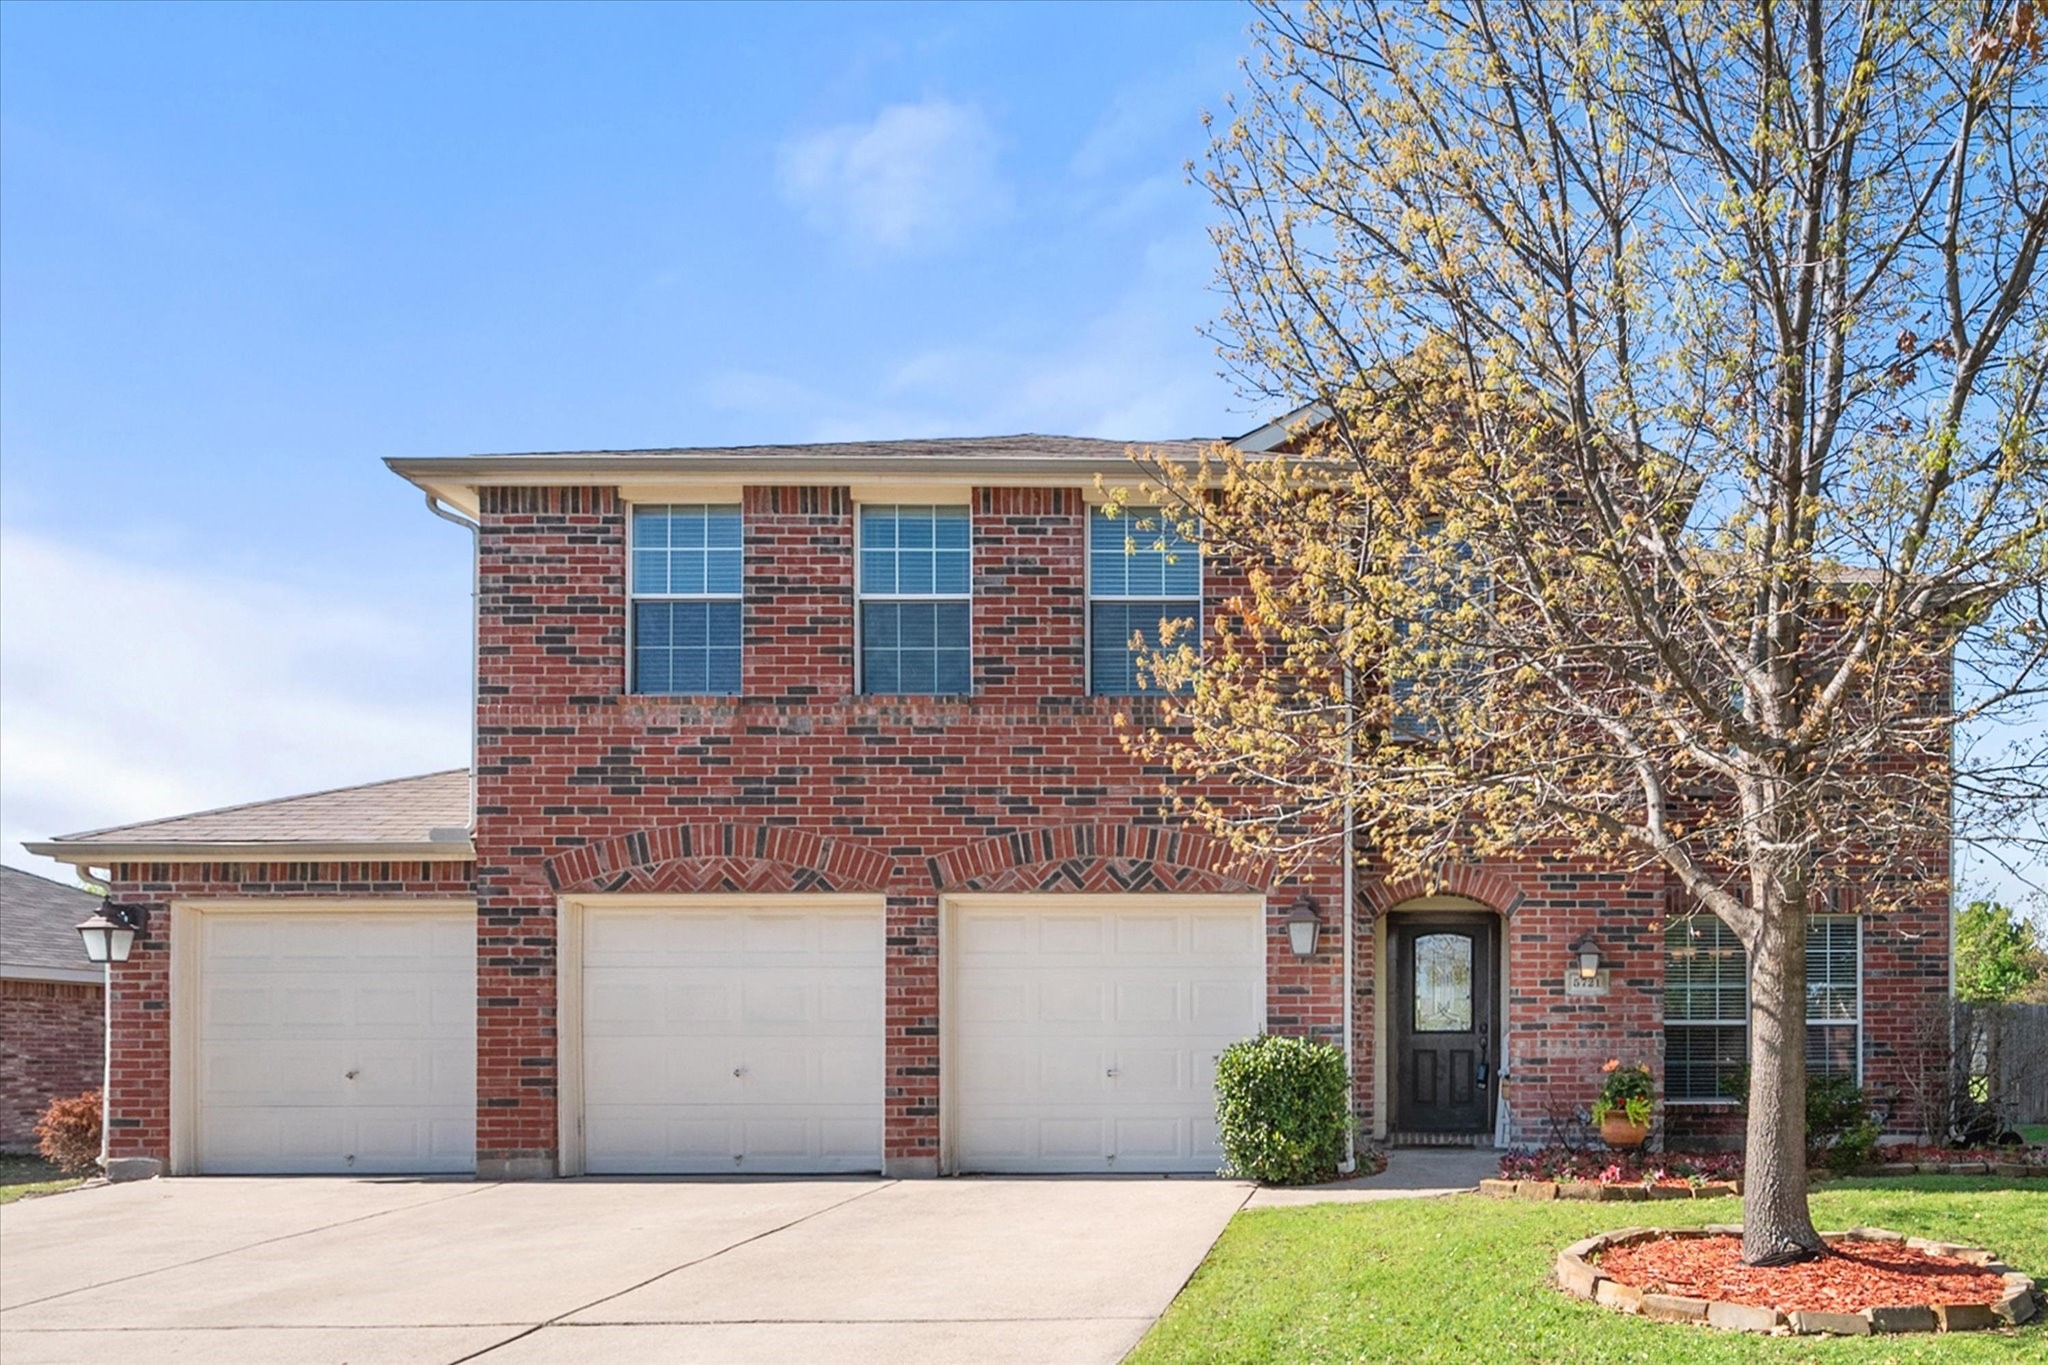 5721 Secco Drive Arlington, Mansfield, and surrounding areas. Home Listings - Front Real Estate Company Real Estate, Sell Home, Buy Home, Property Analysis, Home Ownership